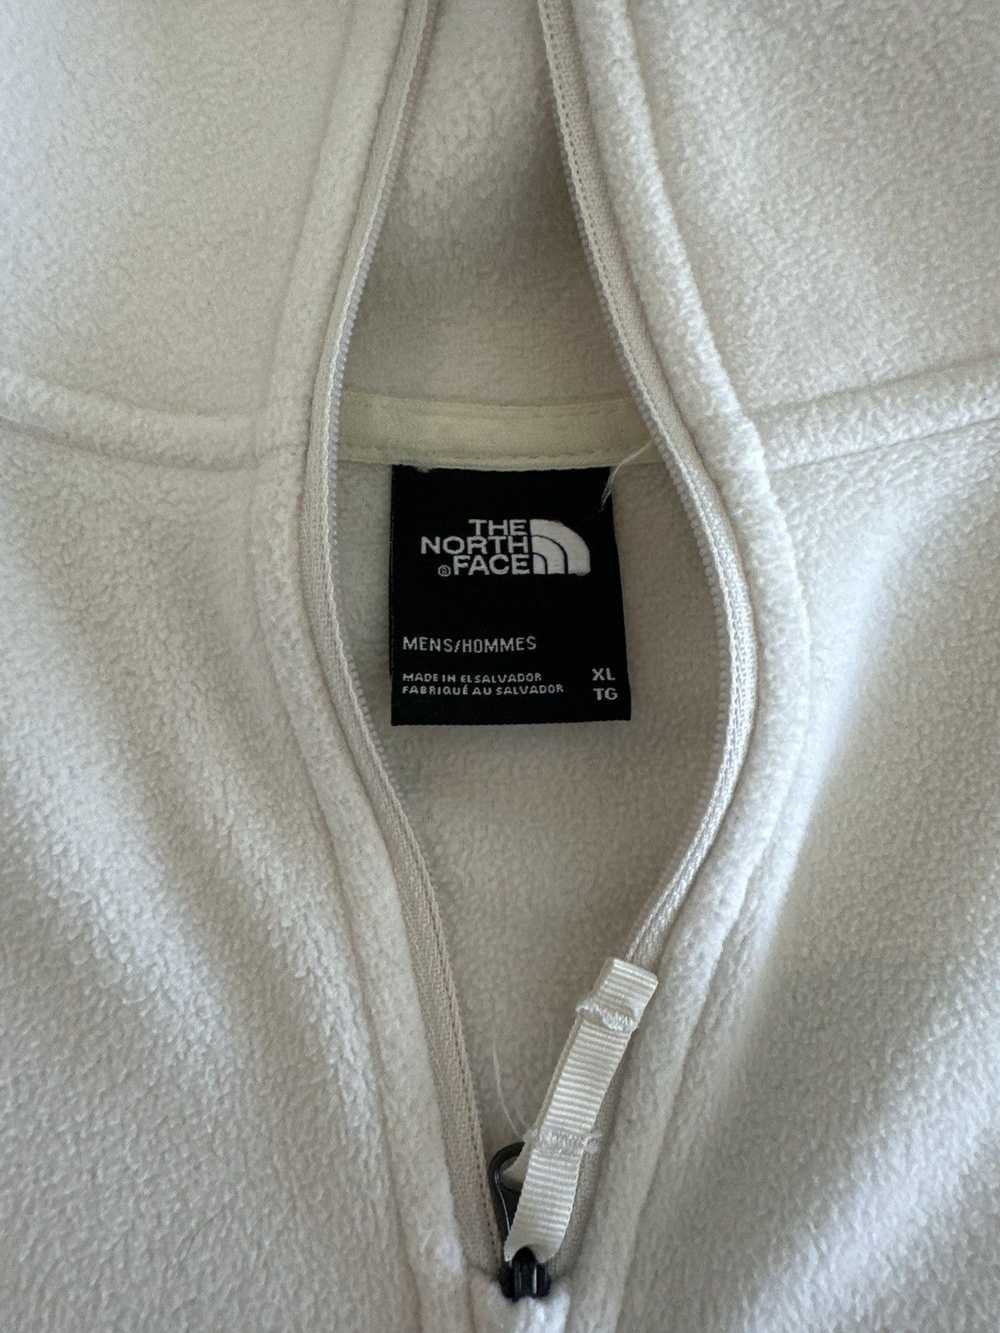 The North Face The North Face Fleece Quarter Zip - image 4